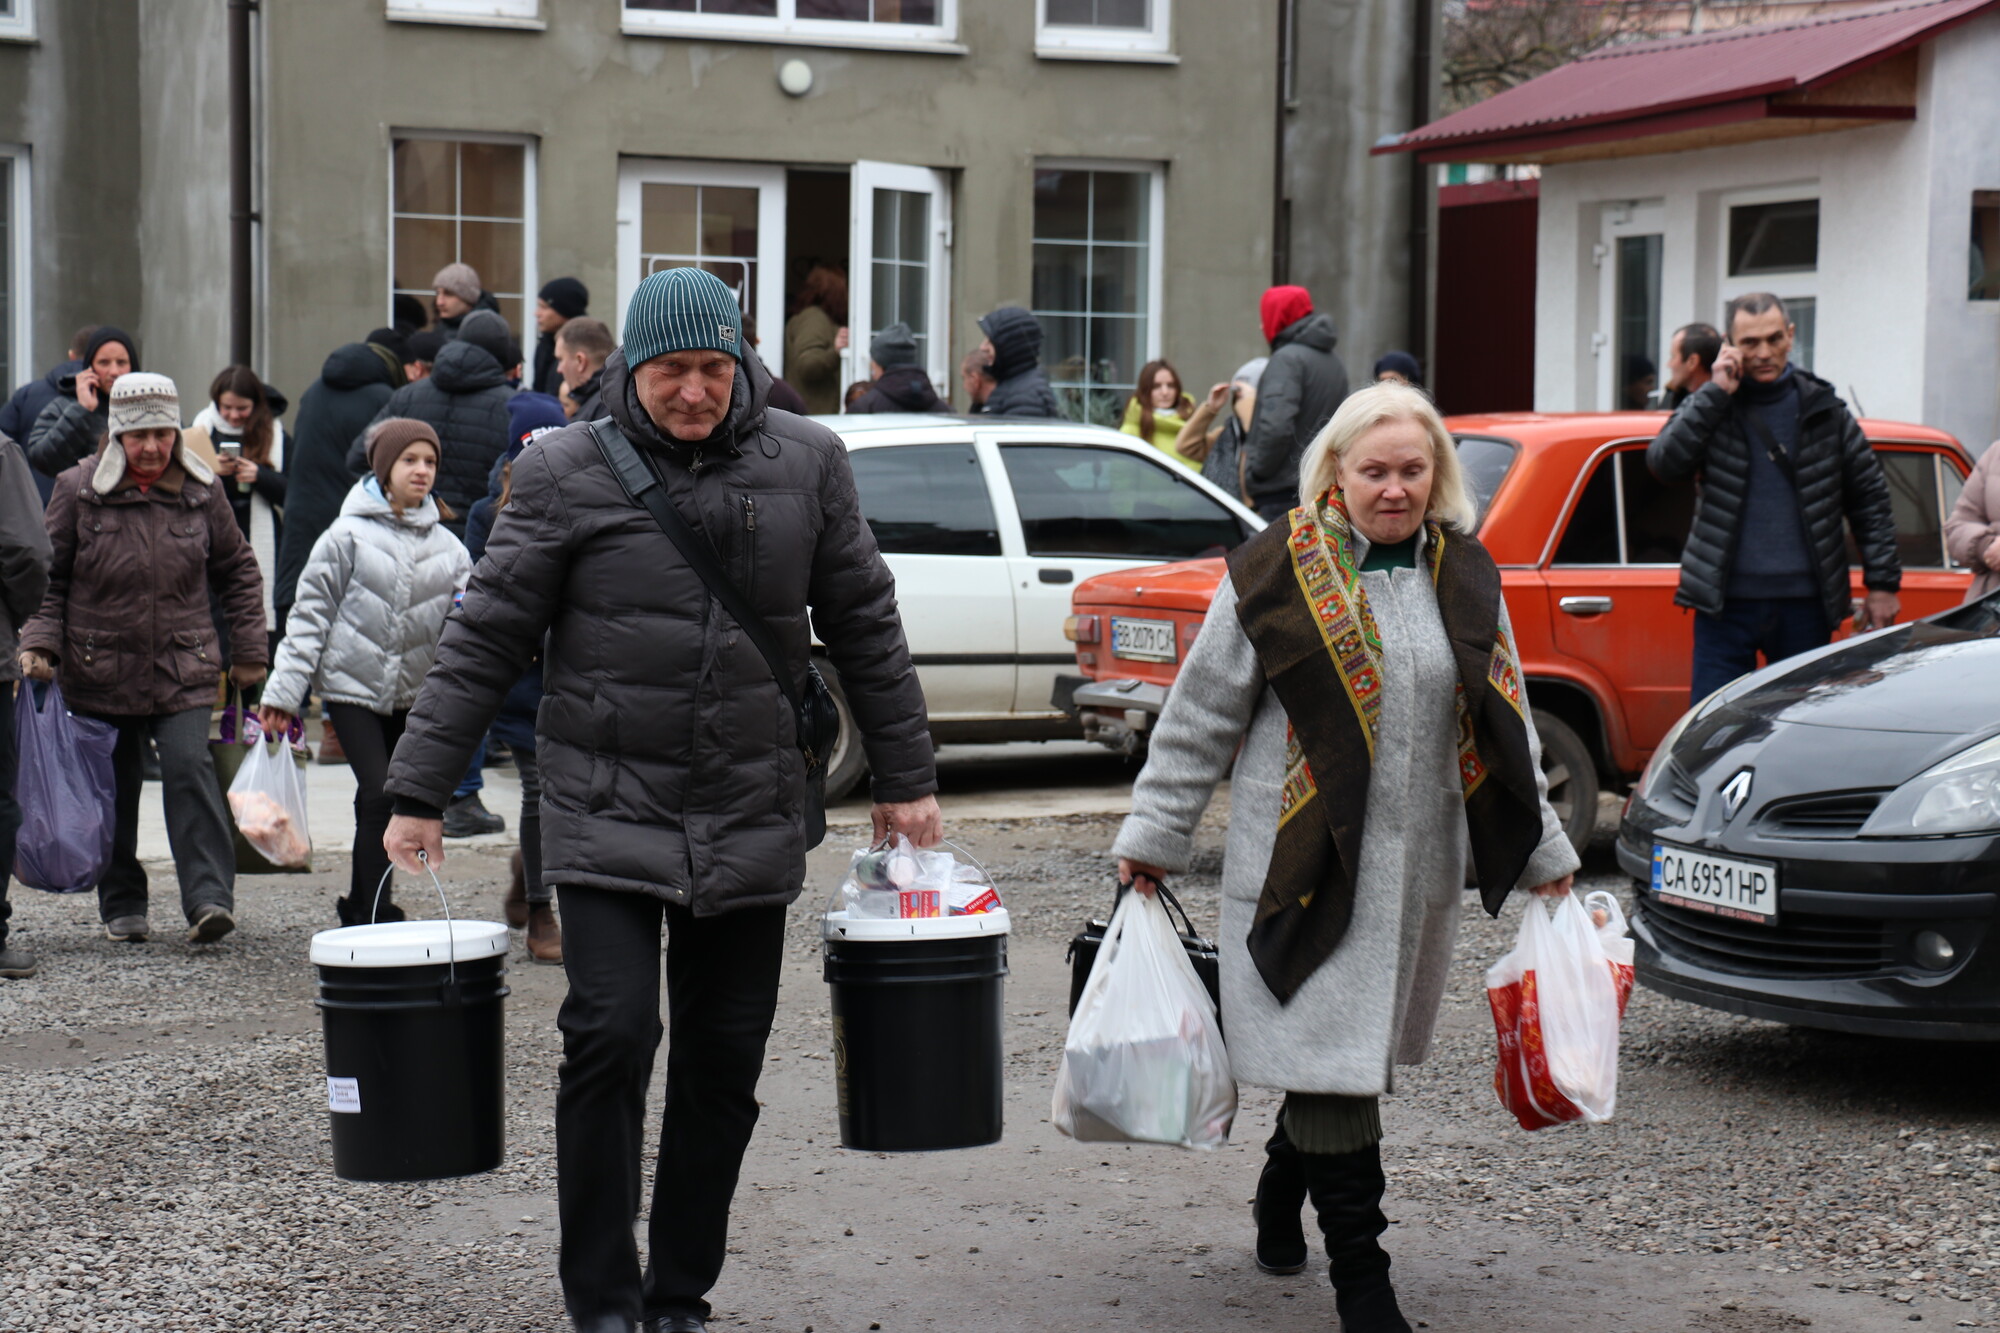 A man and a woman walk away from a building caring bags and five gallon buckets